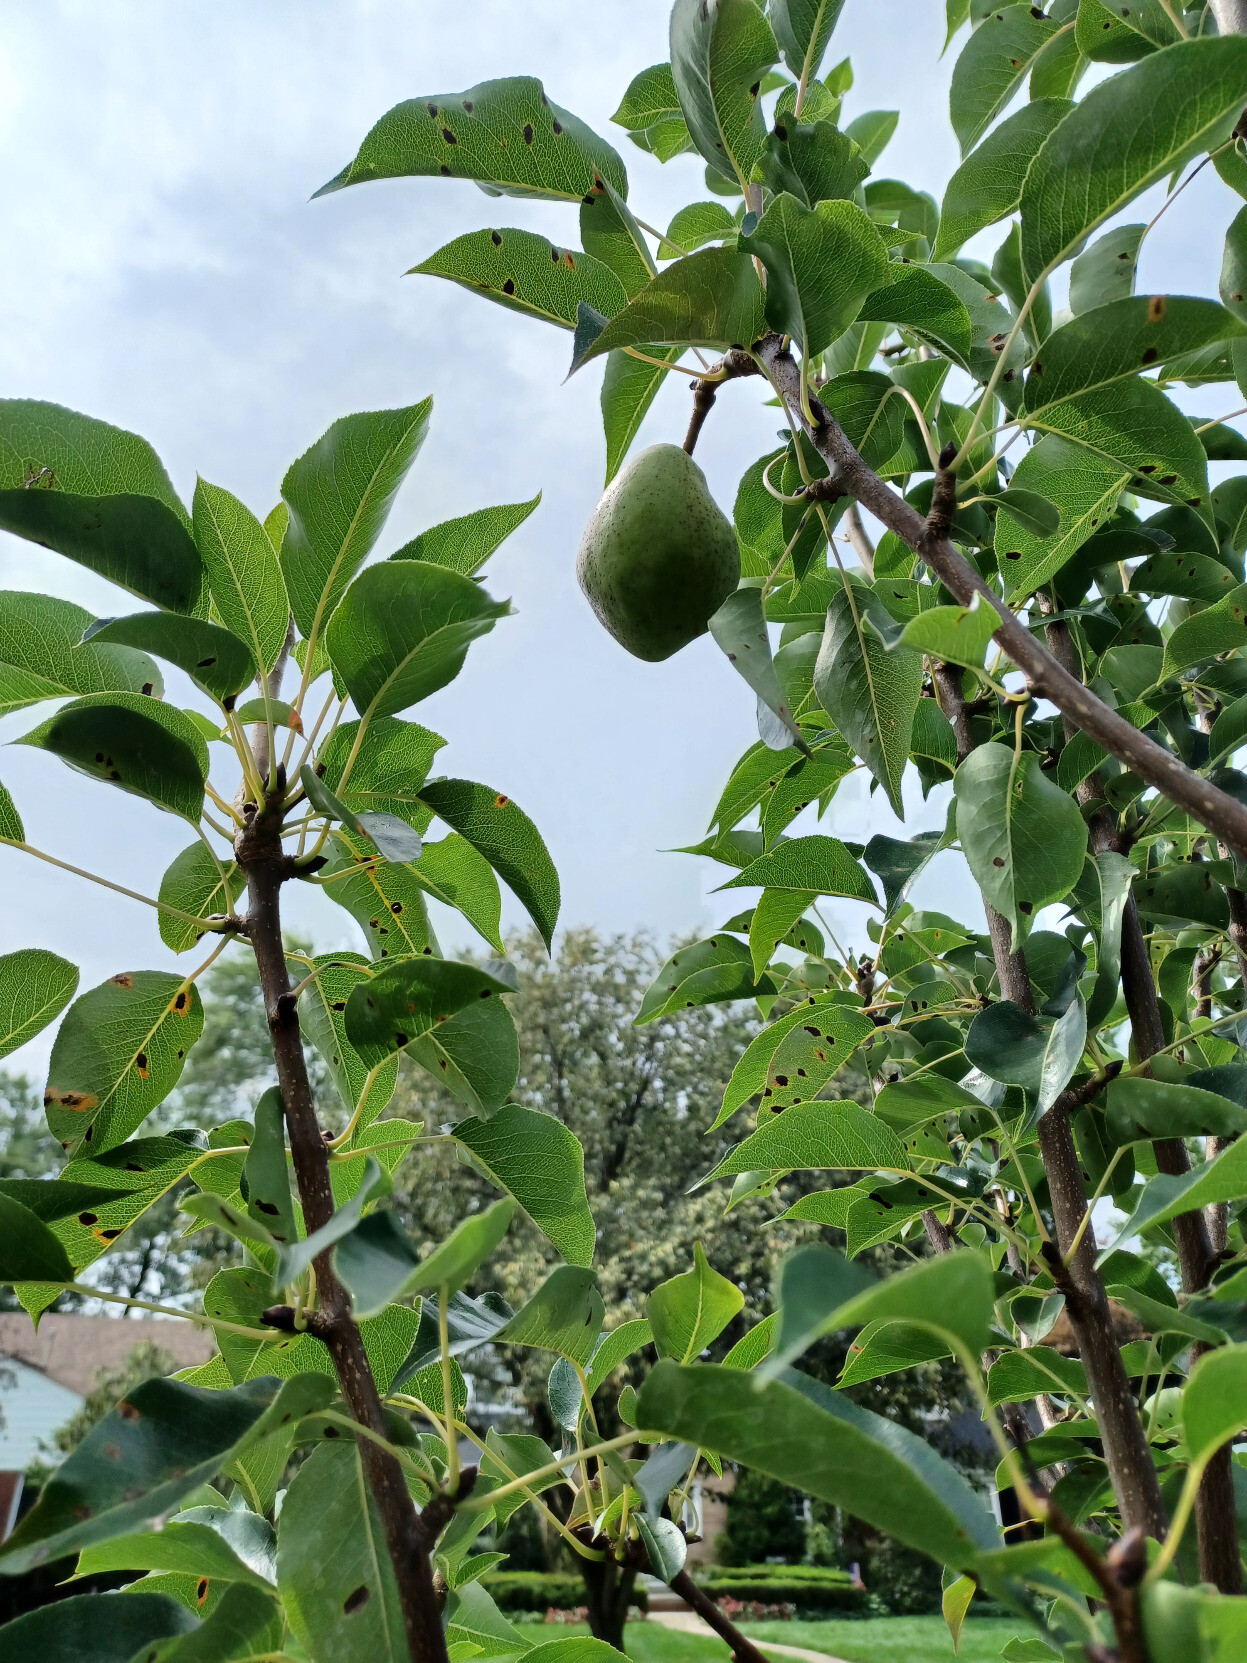 A high branch of a pear tree, with a single pear hanging from it